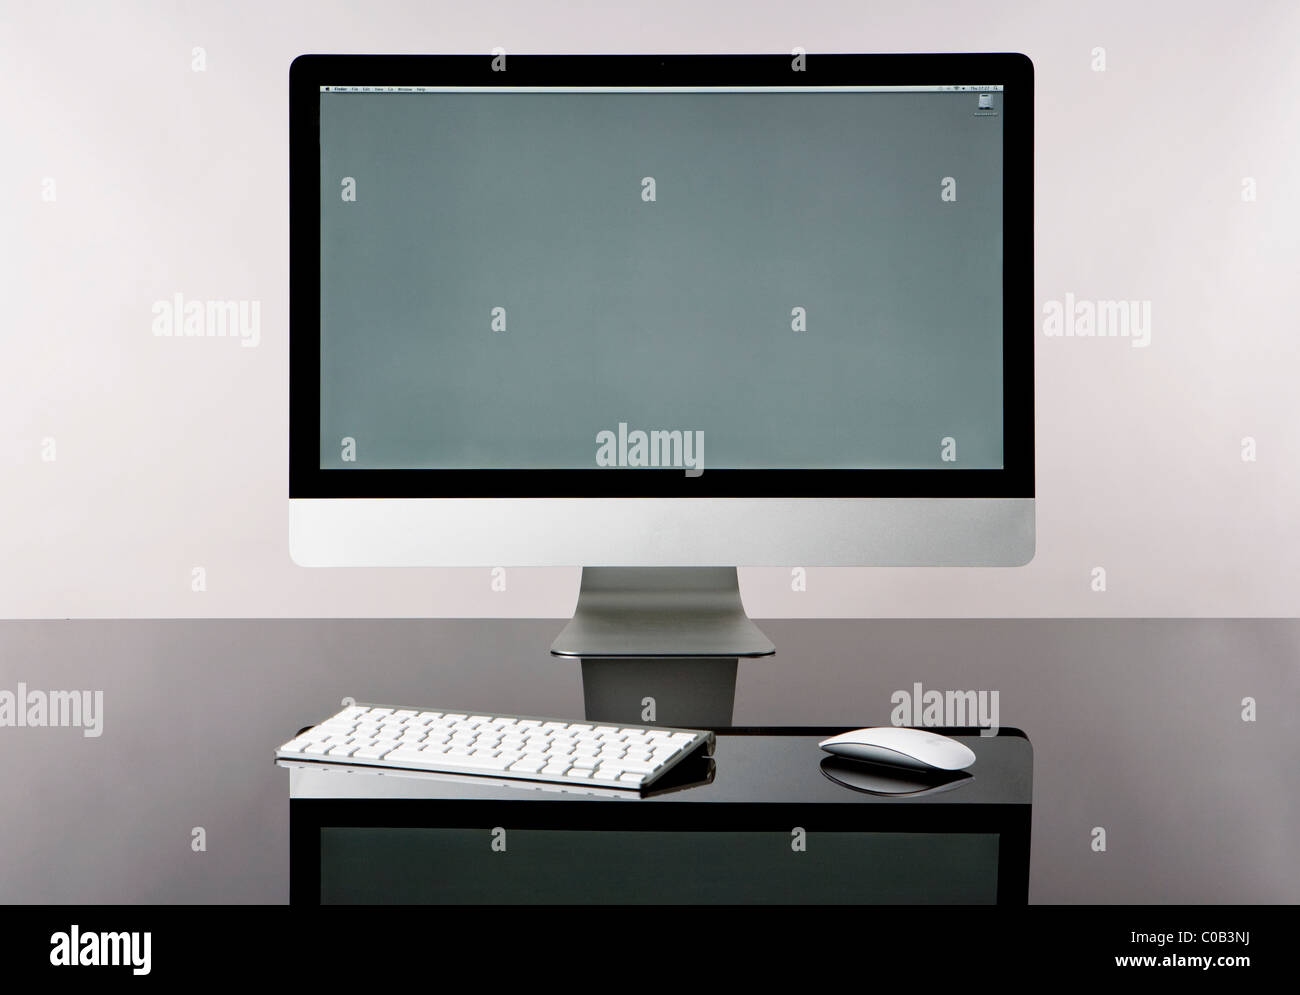 Modern Wireless Computer With Keyboard And Mouse Isolated On A